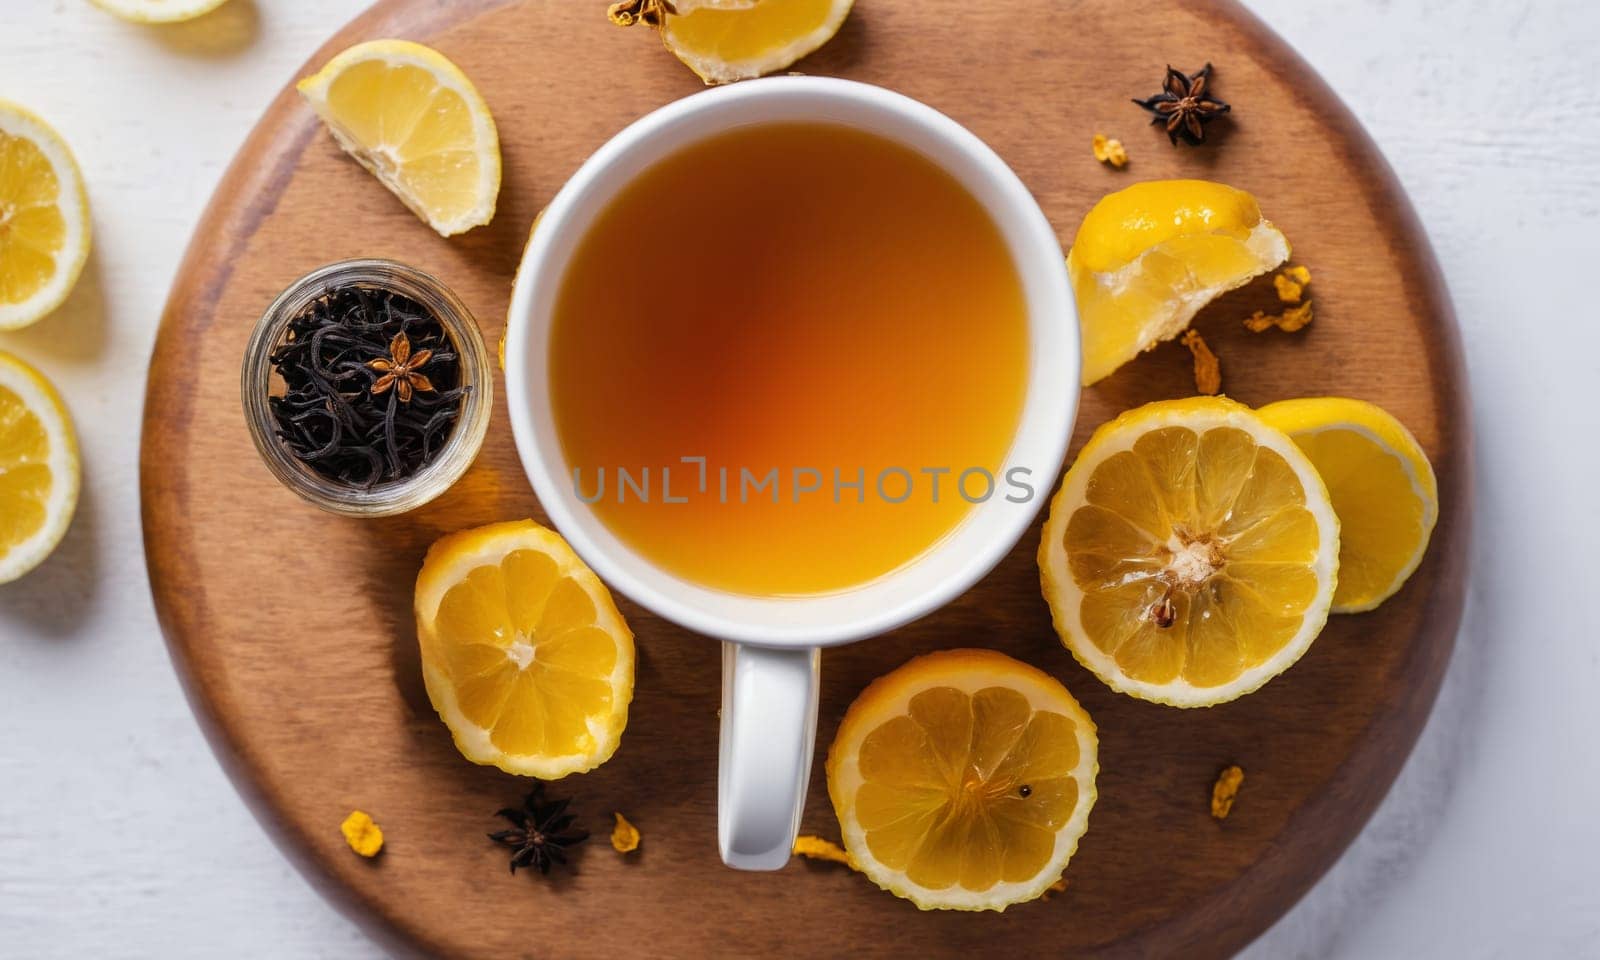 Top view of cup with black tea, turmeric, honey and lemon on white background.